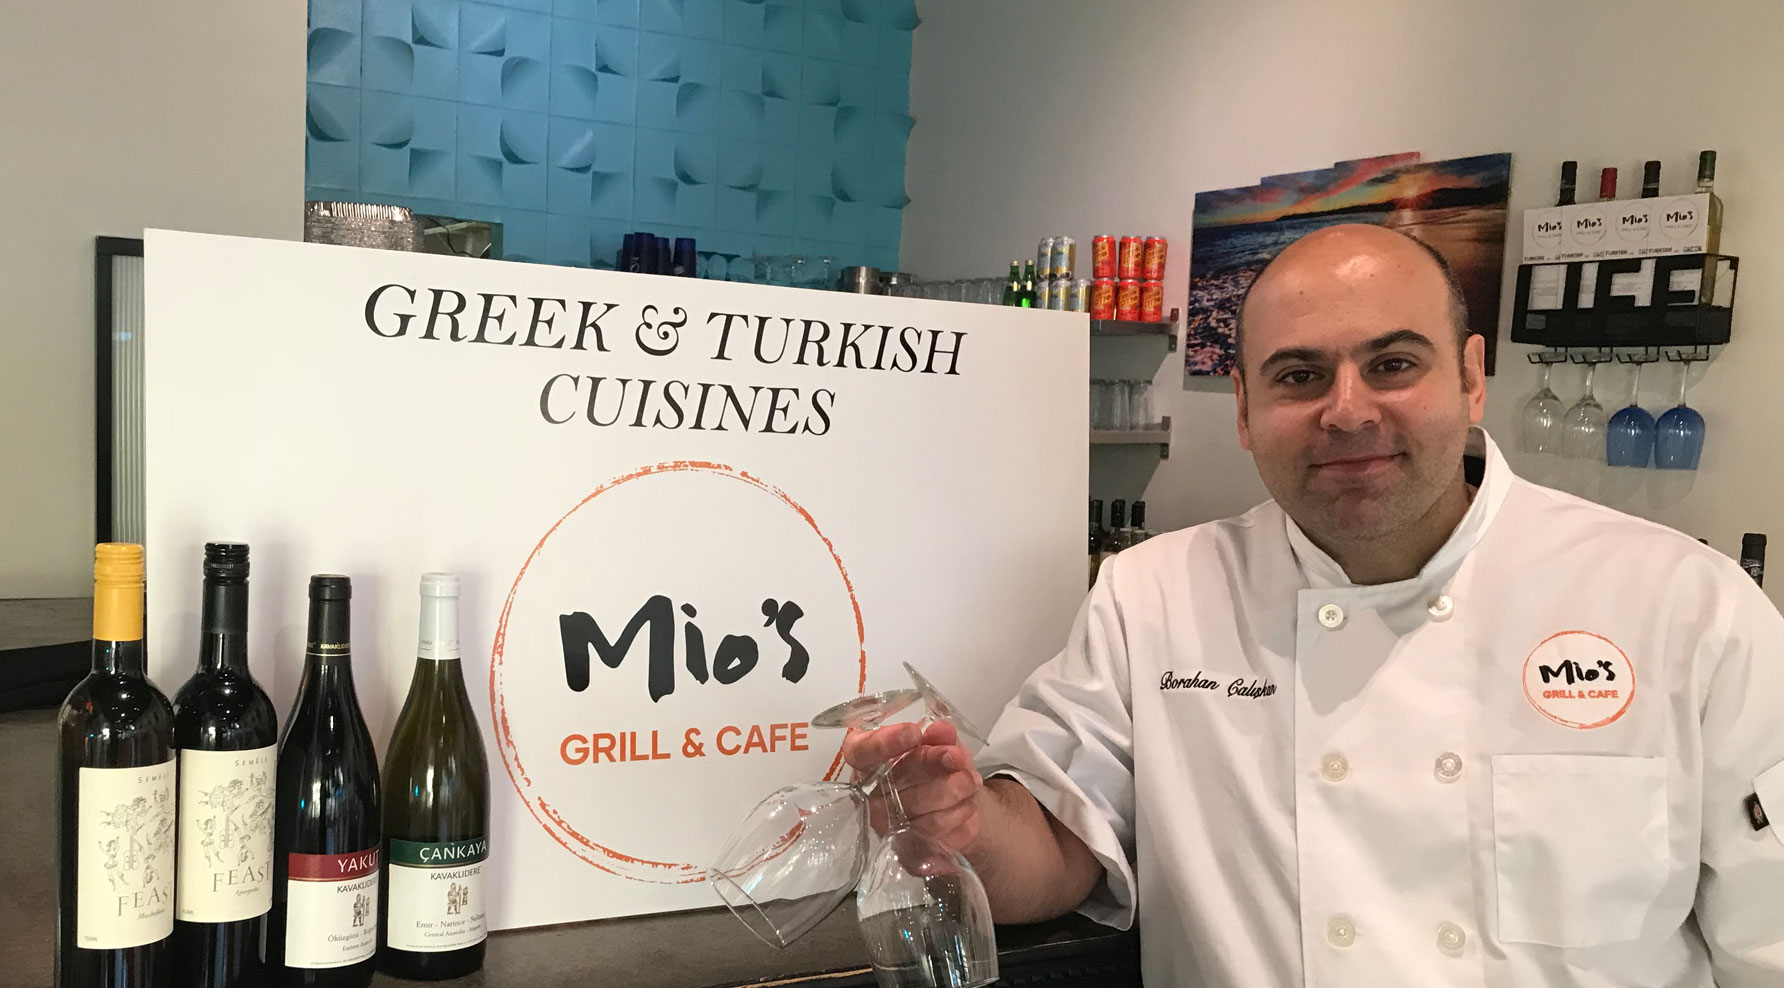 Interview with Bora Caliskan of Mio’s Grill & Cafe – St. Petersburg Foodies Podcast Episode 68